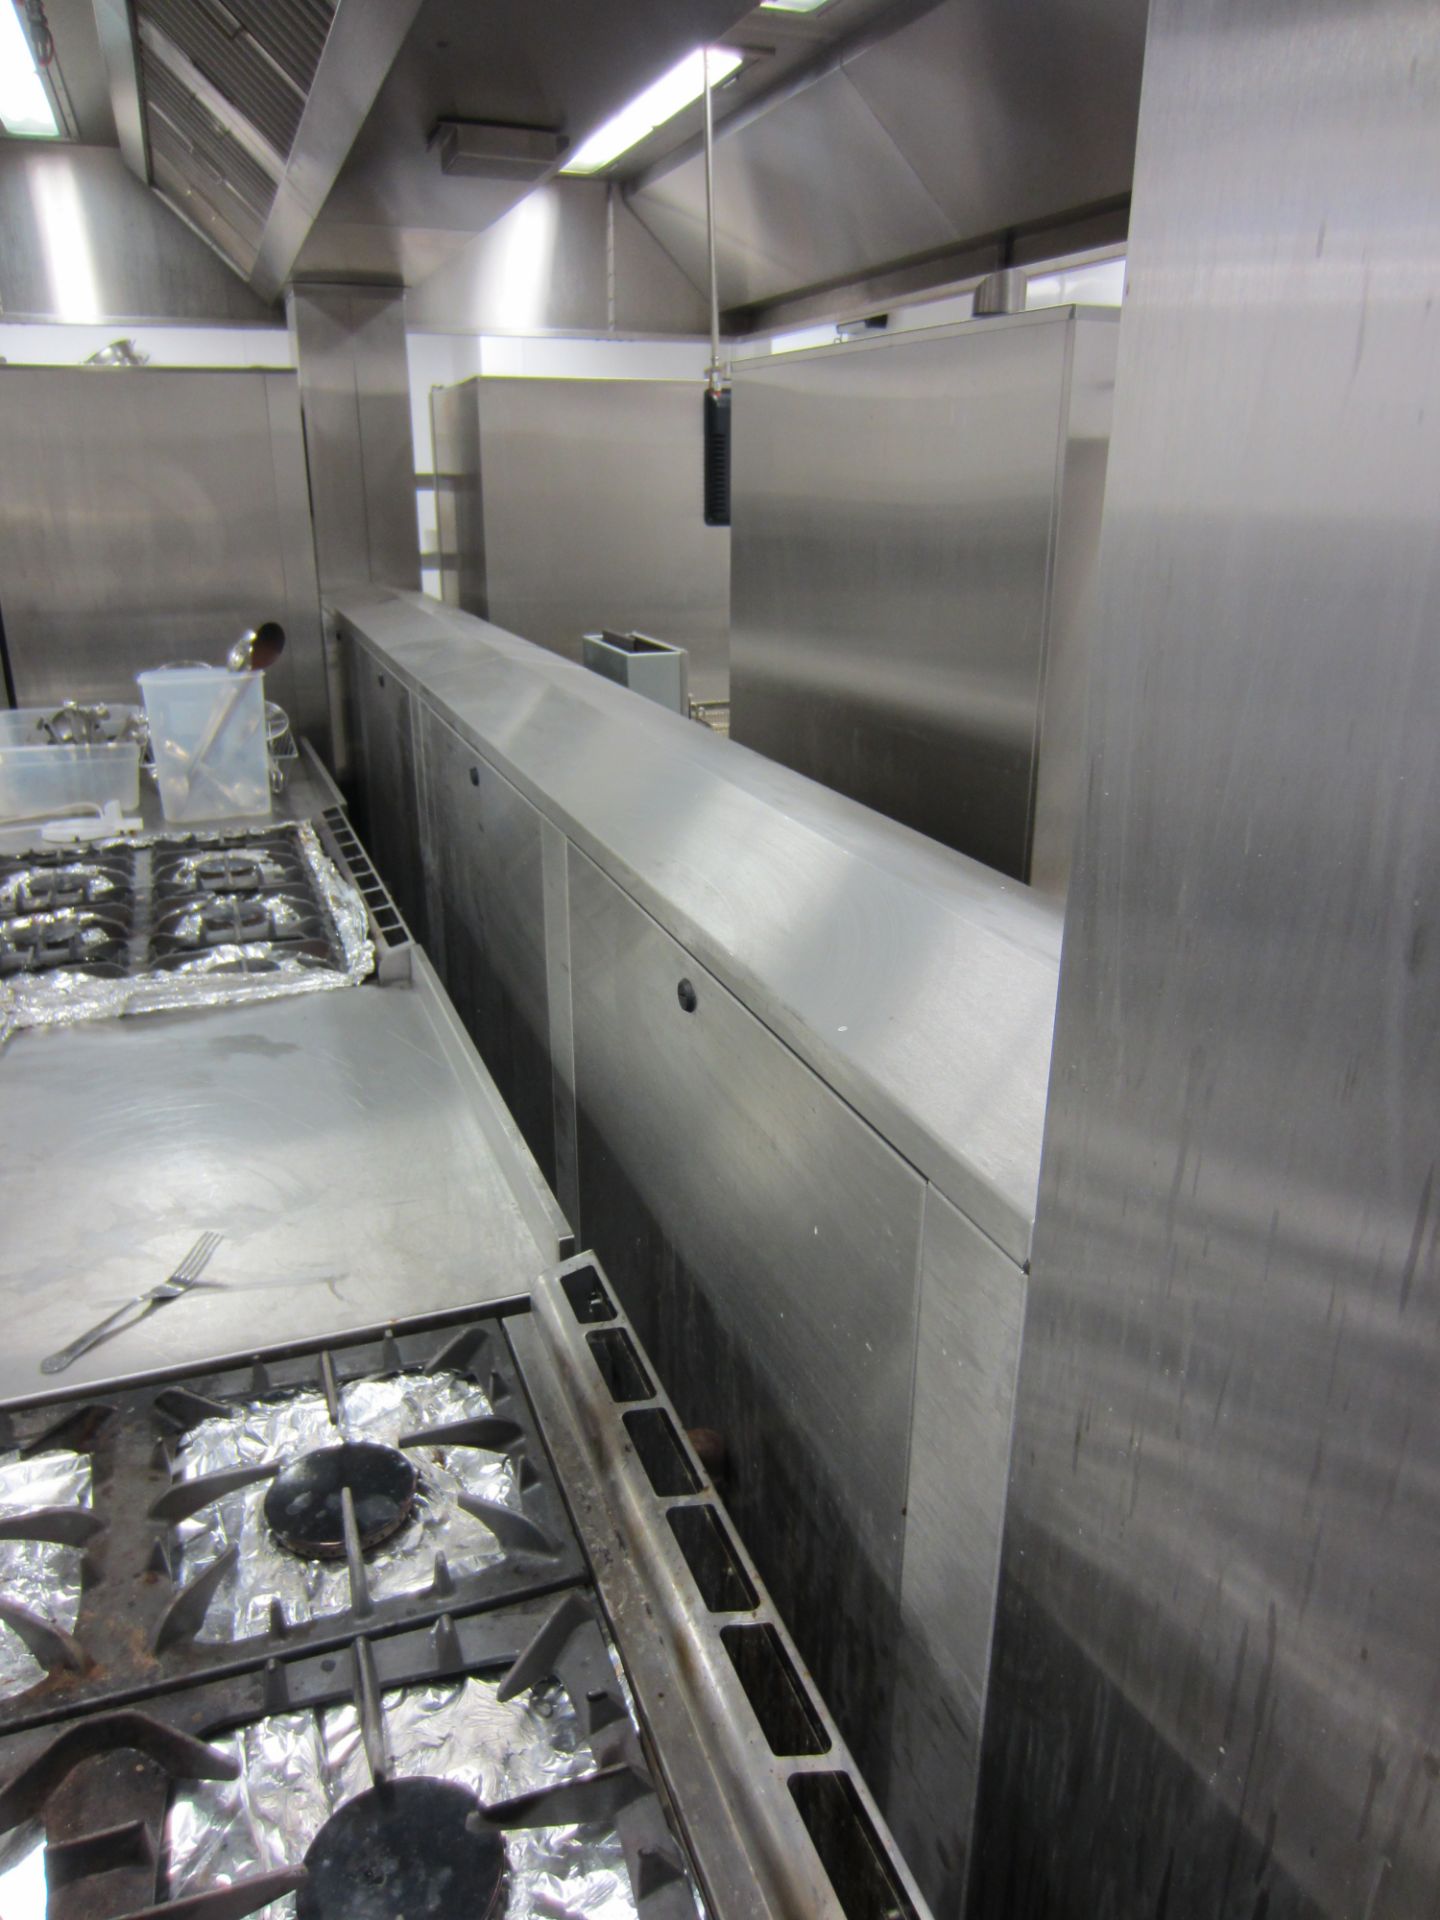 Large Overhead Stainless Steel Extraction Hood Incorporating Fire Suppression System - Image 6 of 7